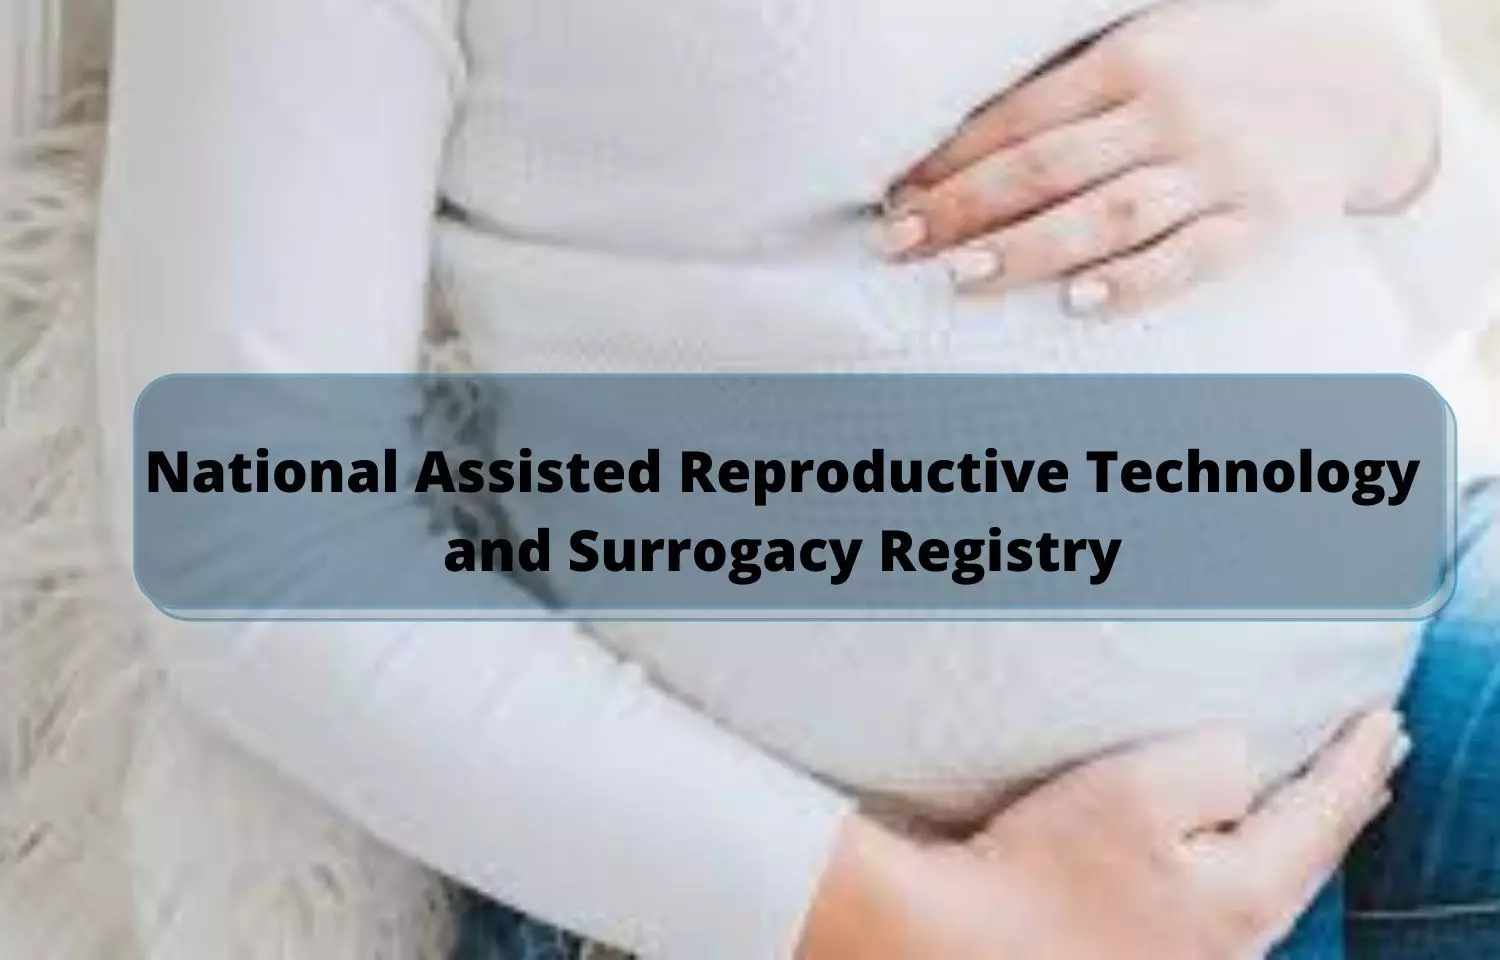 Govt sets up National Assisted Reproductive Technology and Surrogacy Registry: Gazette Notification